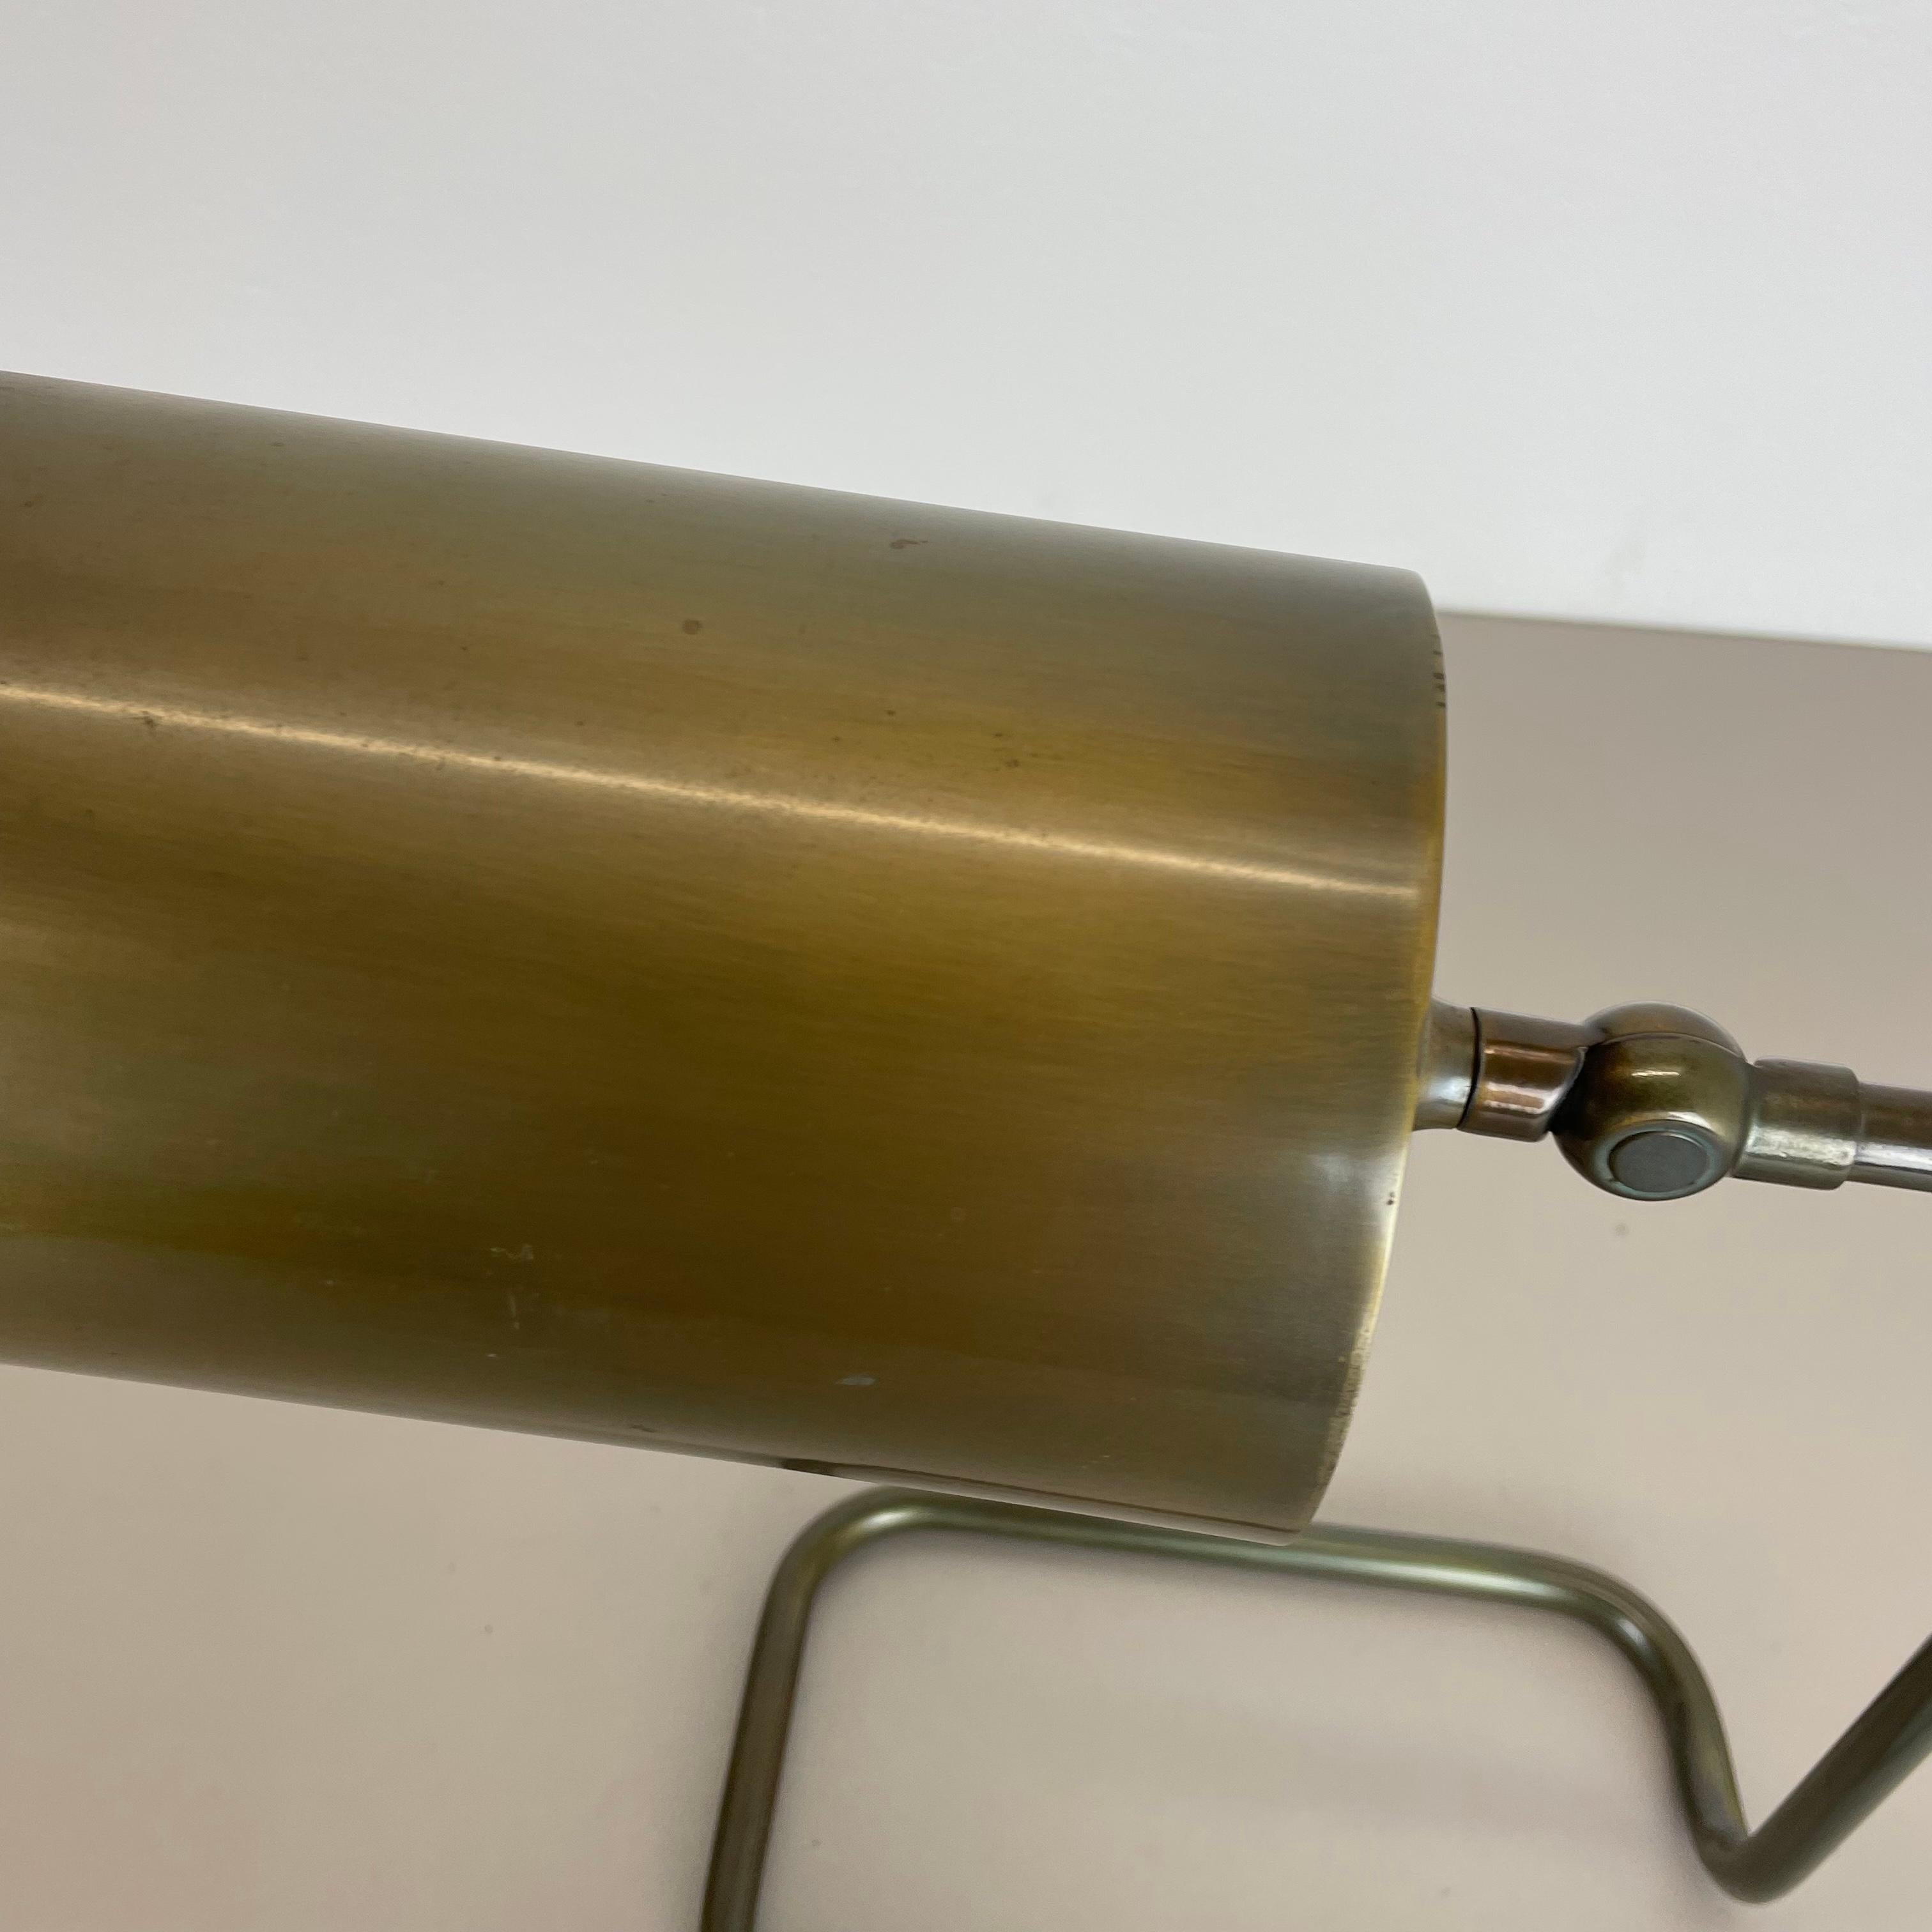 Beautiful Cubic Original Modernist Brass Metal Table Light, Germany, 1970s For Sale 1